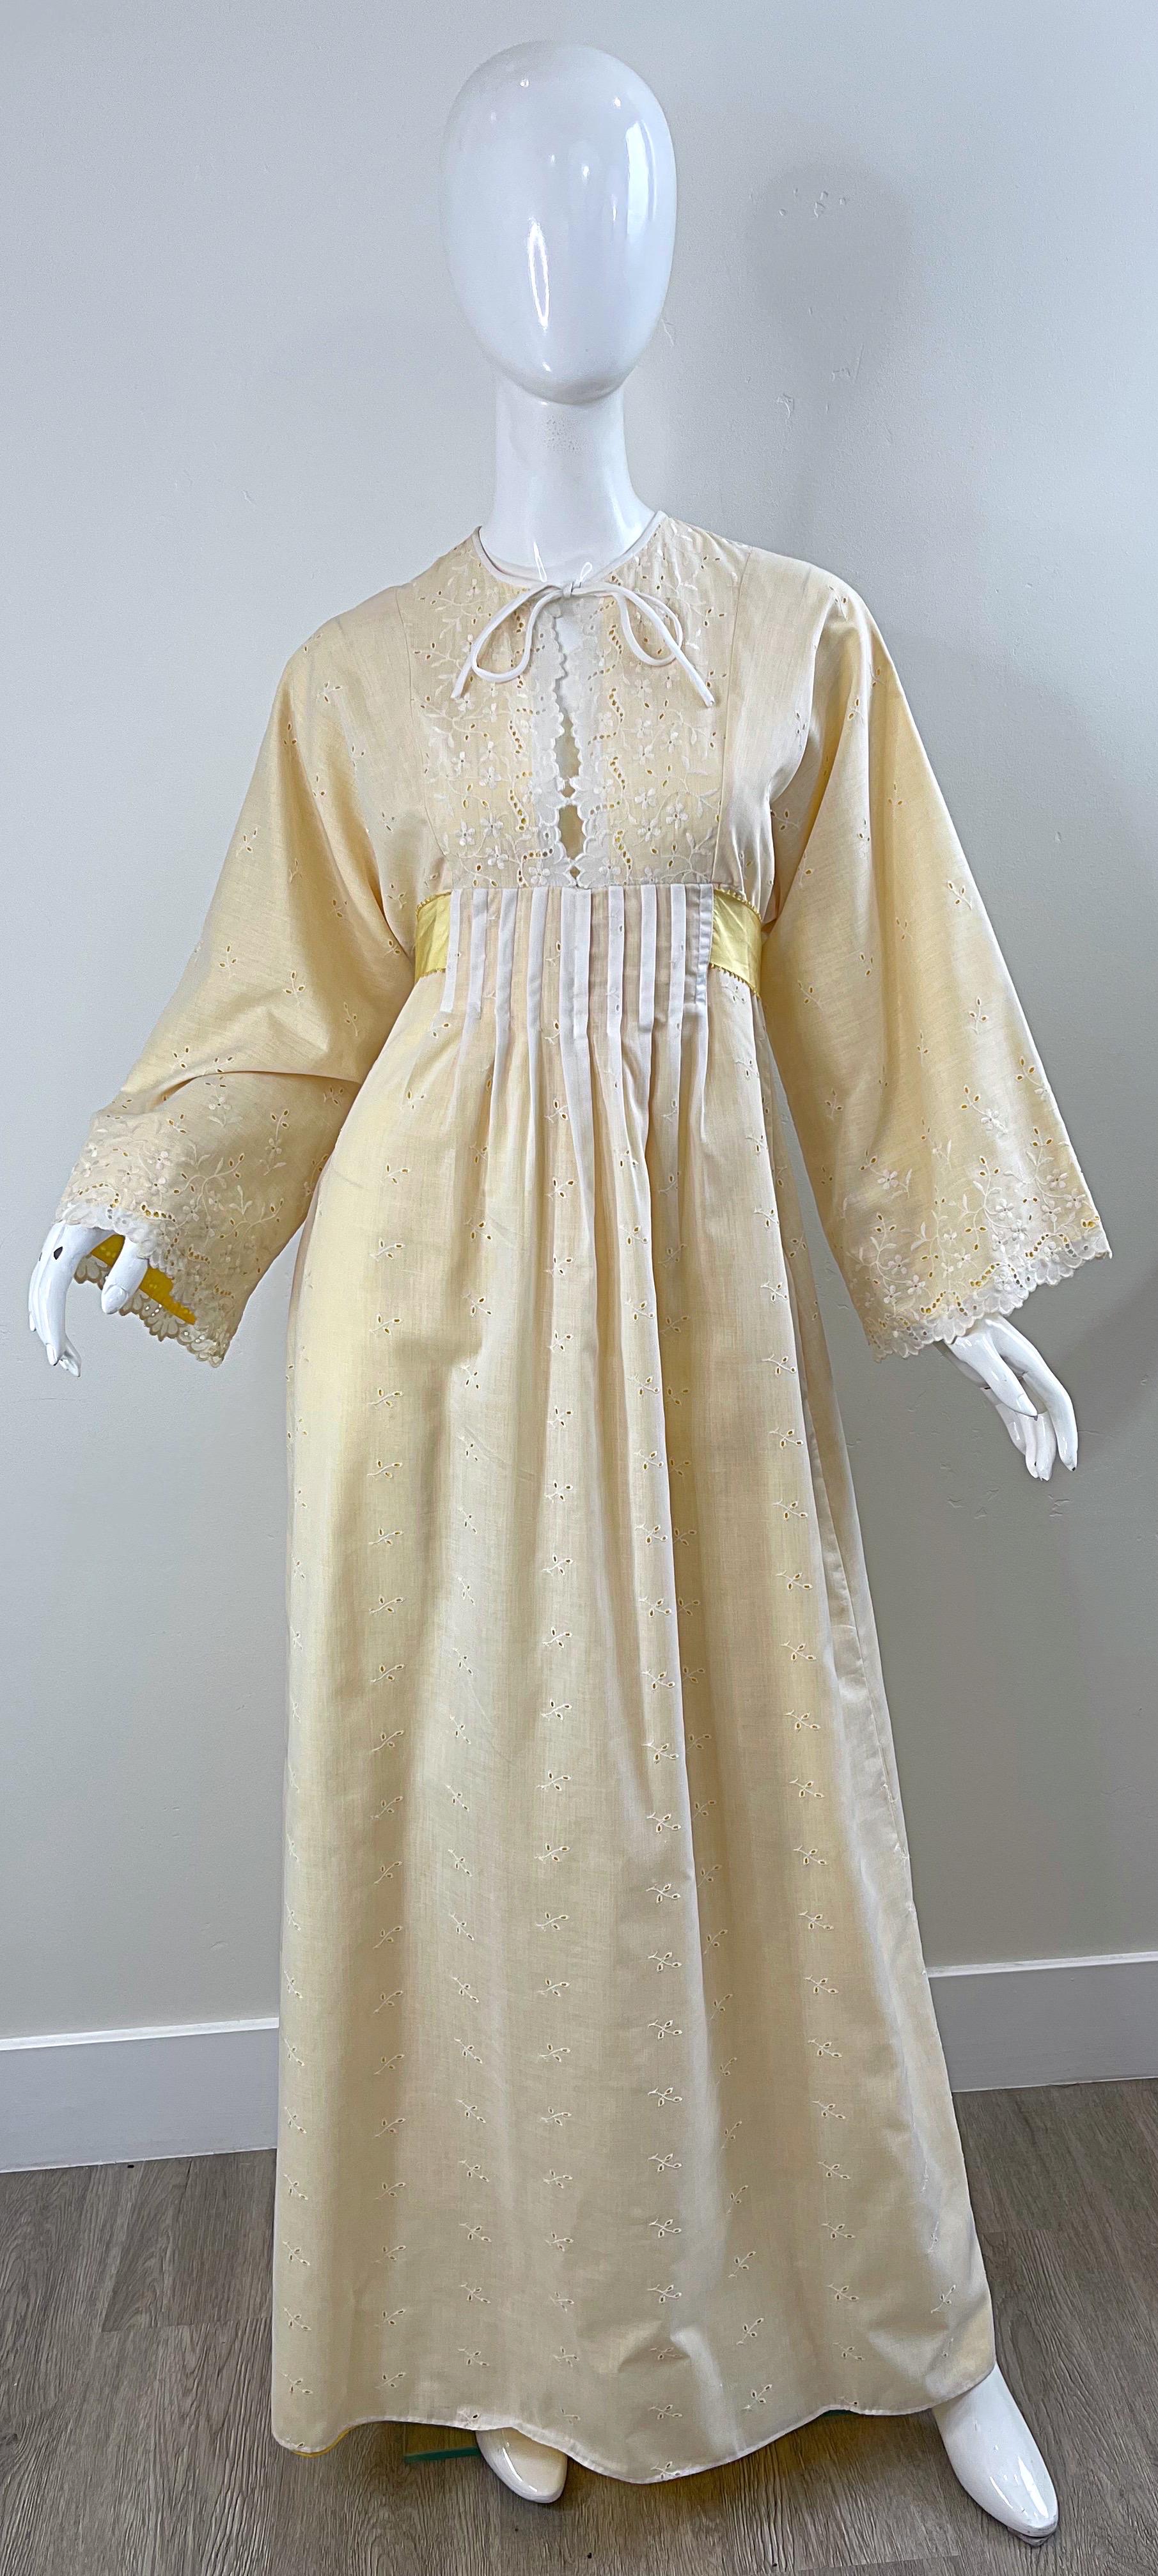 Beige 1970s Bill Tice Pale Yellow + White Cotton Eyelet Vintage 70s Maxi Dress For Sale